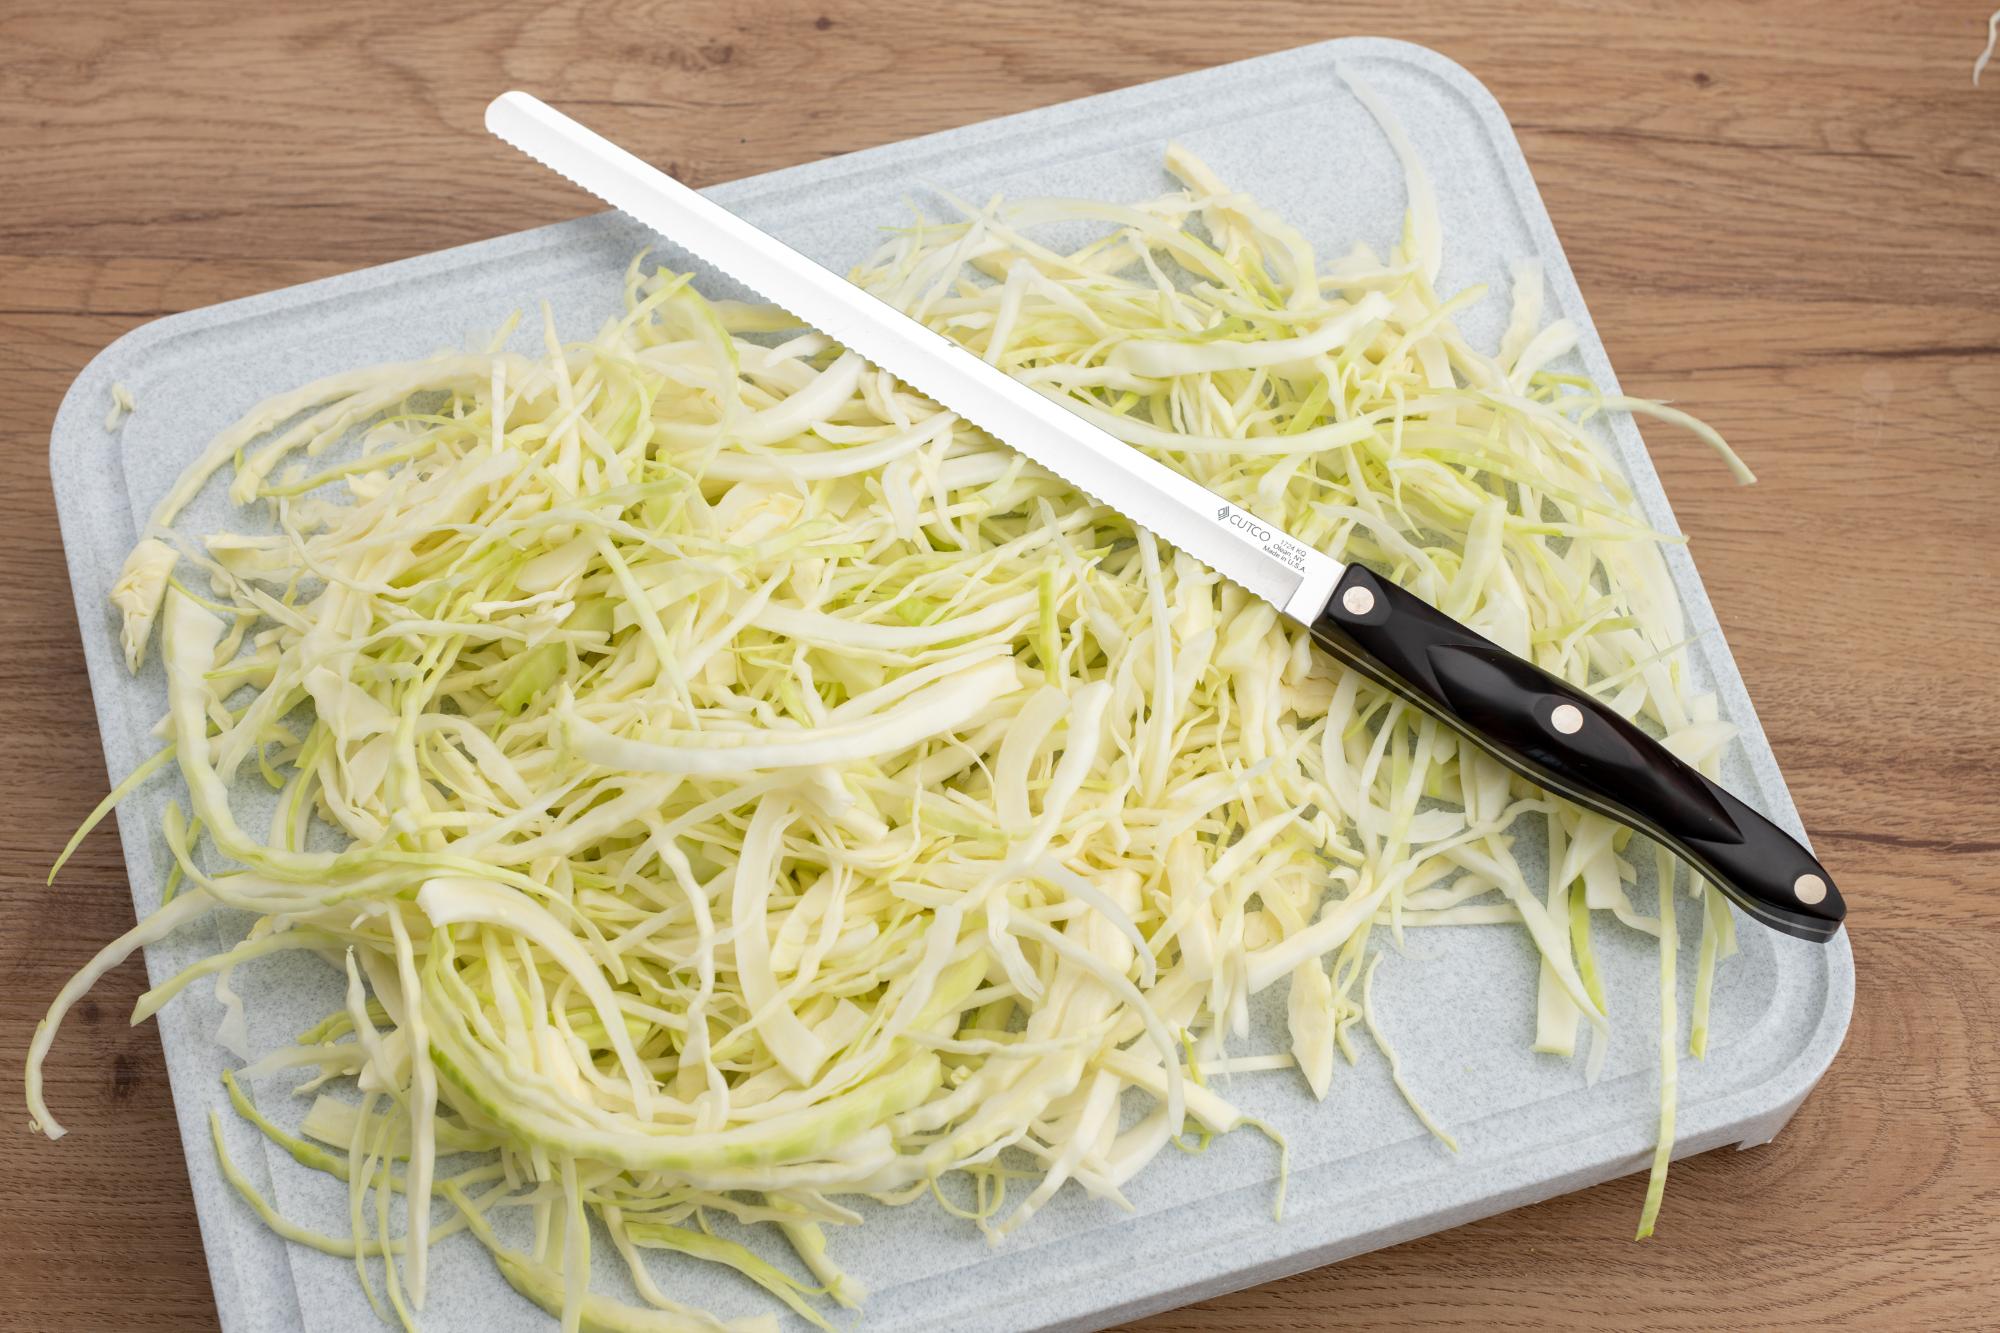 Petite Slicer used to shred the cabbage.